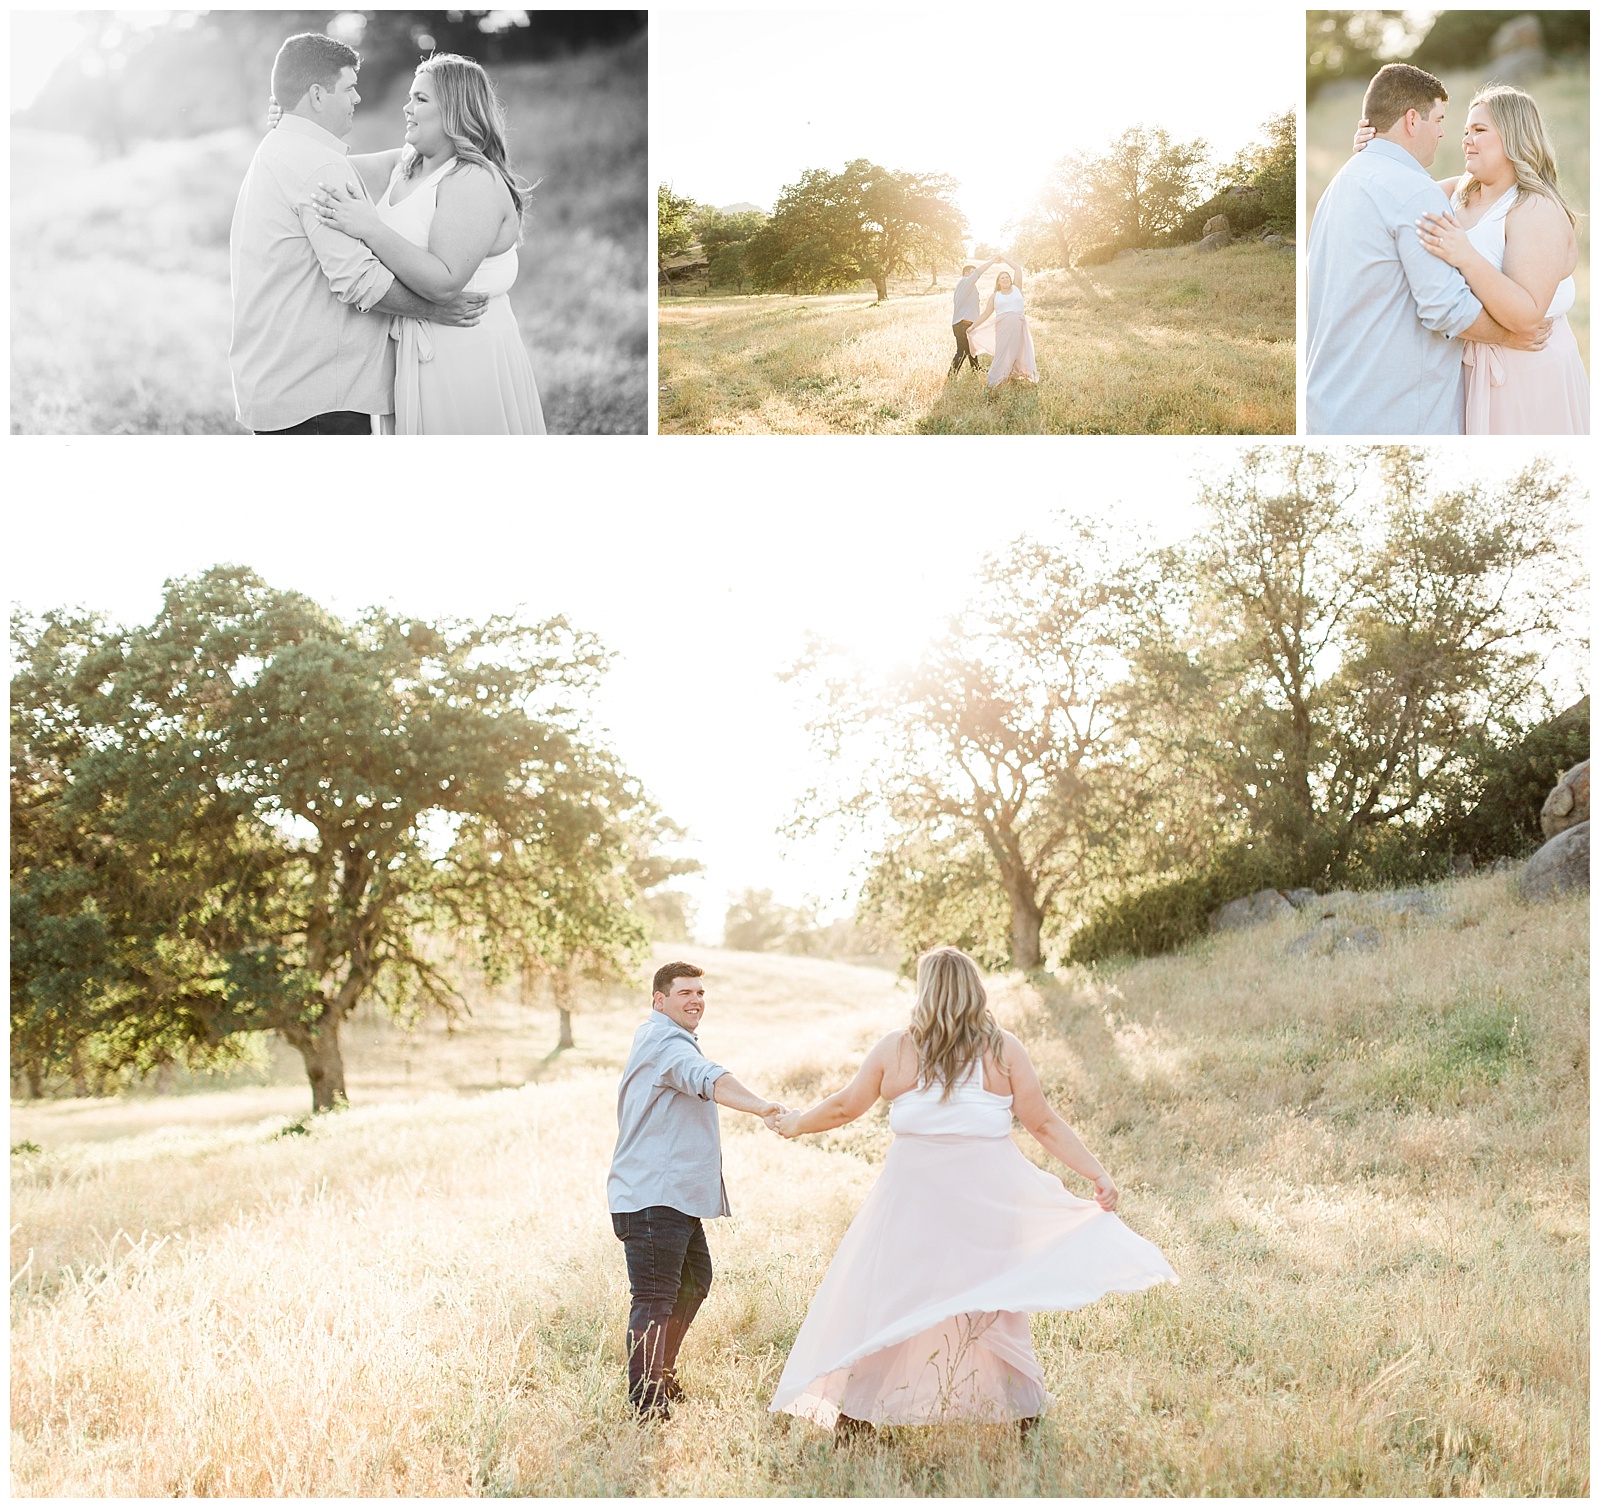 blush and light blue engagement photo outfit ideas for summer engagement photos